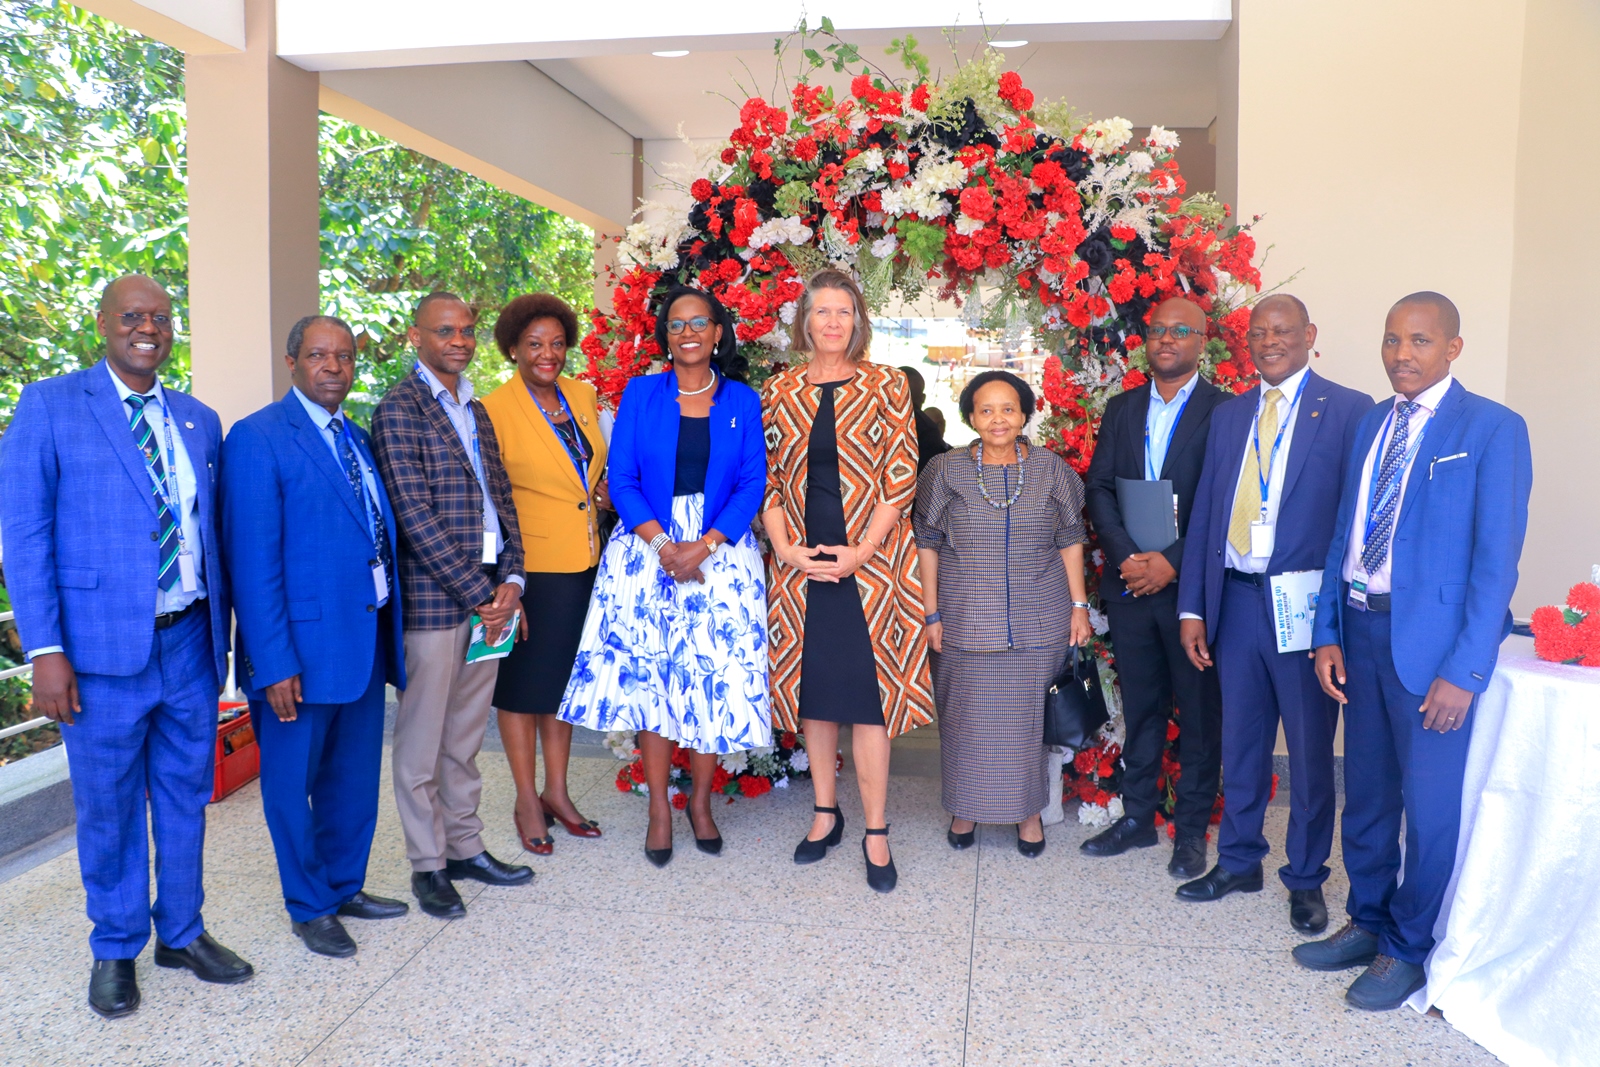 Ambassador of the Netherlands to Uganda H.E Dr. Karin Boven alongside the Makerere University leadership at the launch of the Auditorium, phase 1A of the construction on 15th March 2024. Main Campus, Makerere University, Kampala Uganda, East Africa.